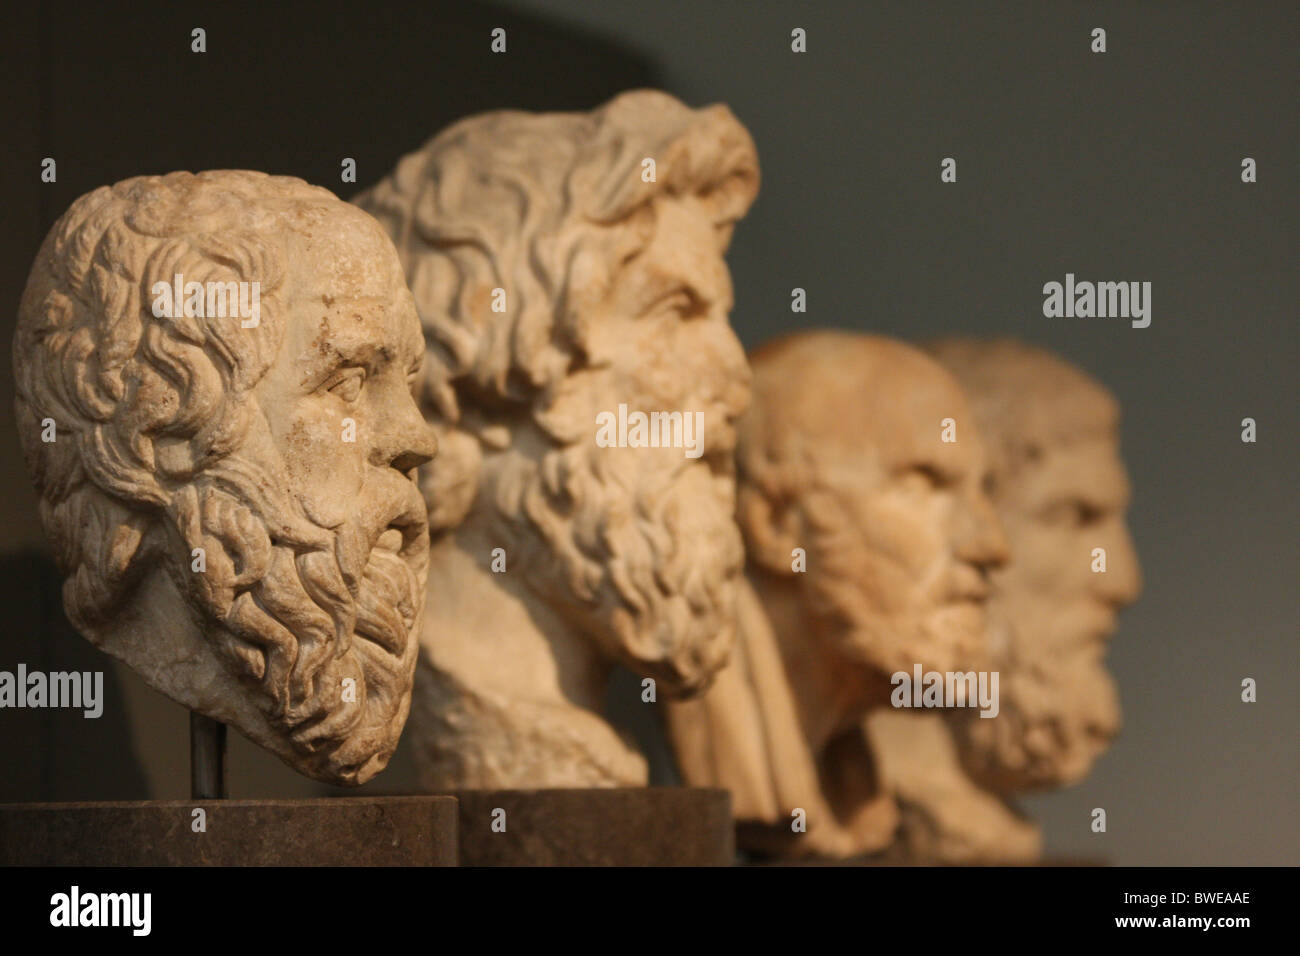 Statues of the Greek Philosophers Socrates, Antisthenes, Chrysippos and Epikouros at the British Museum London Stock Photo